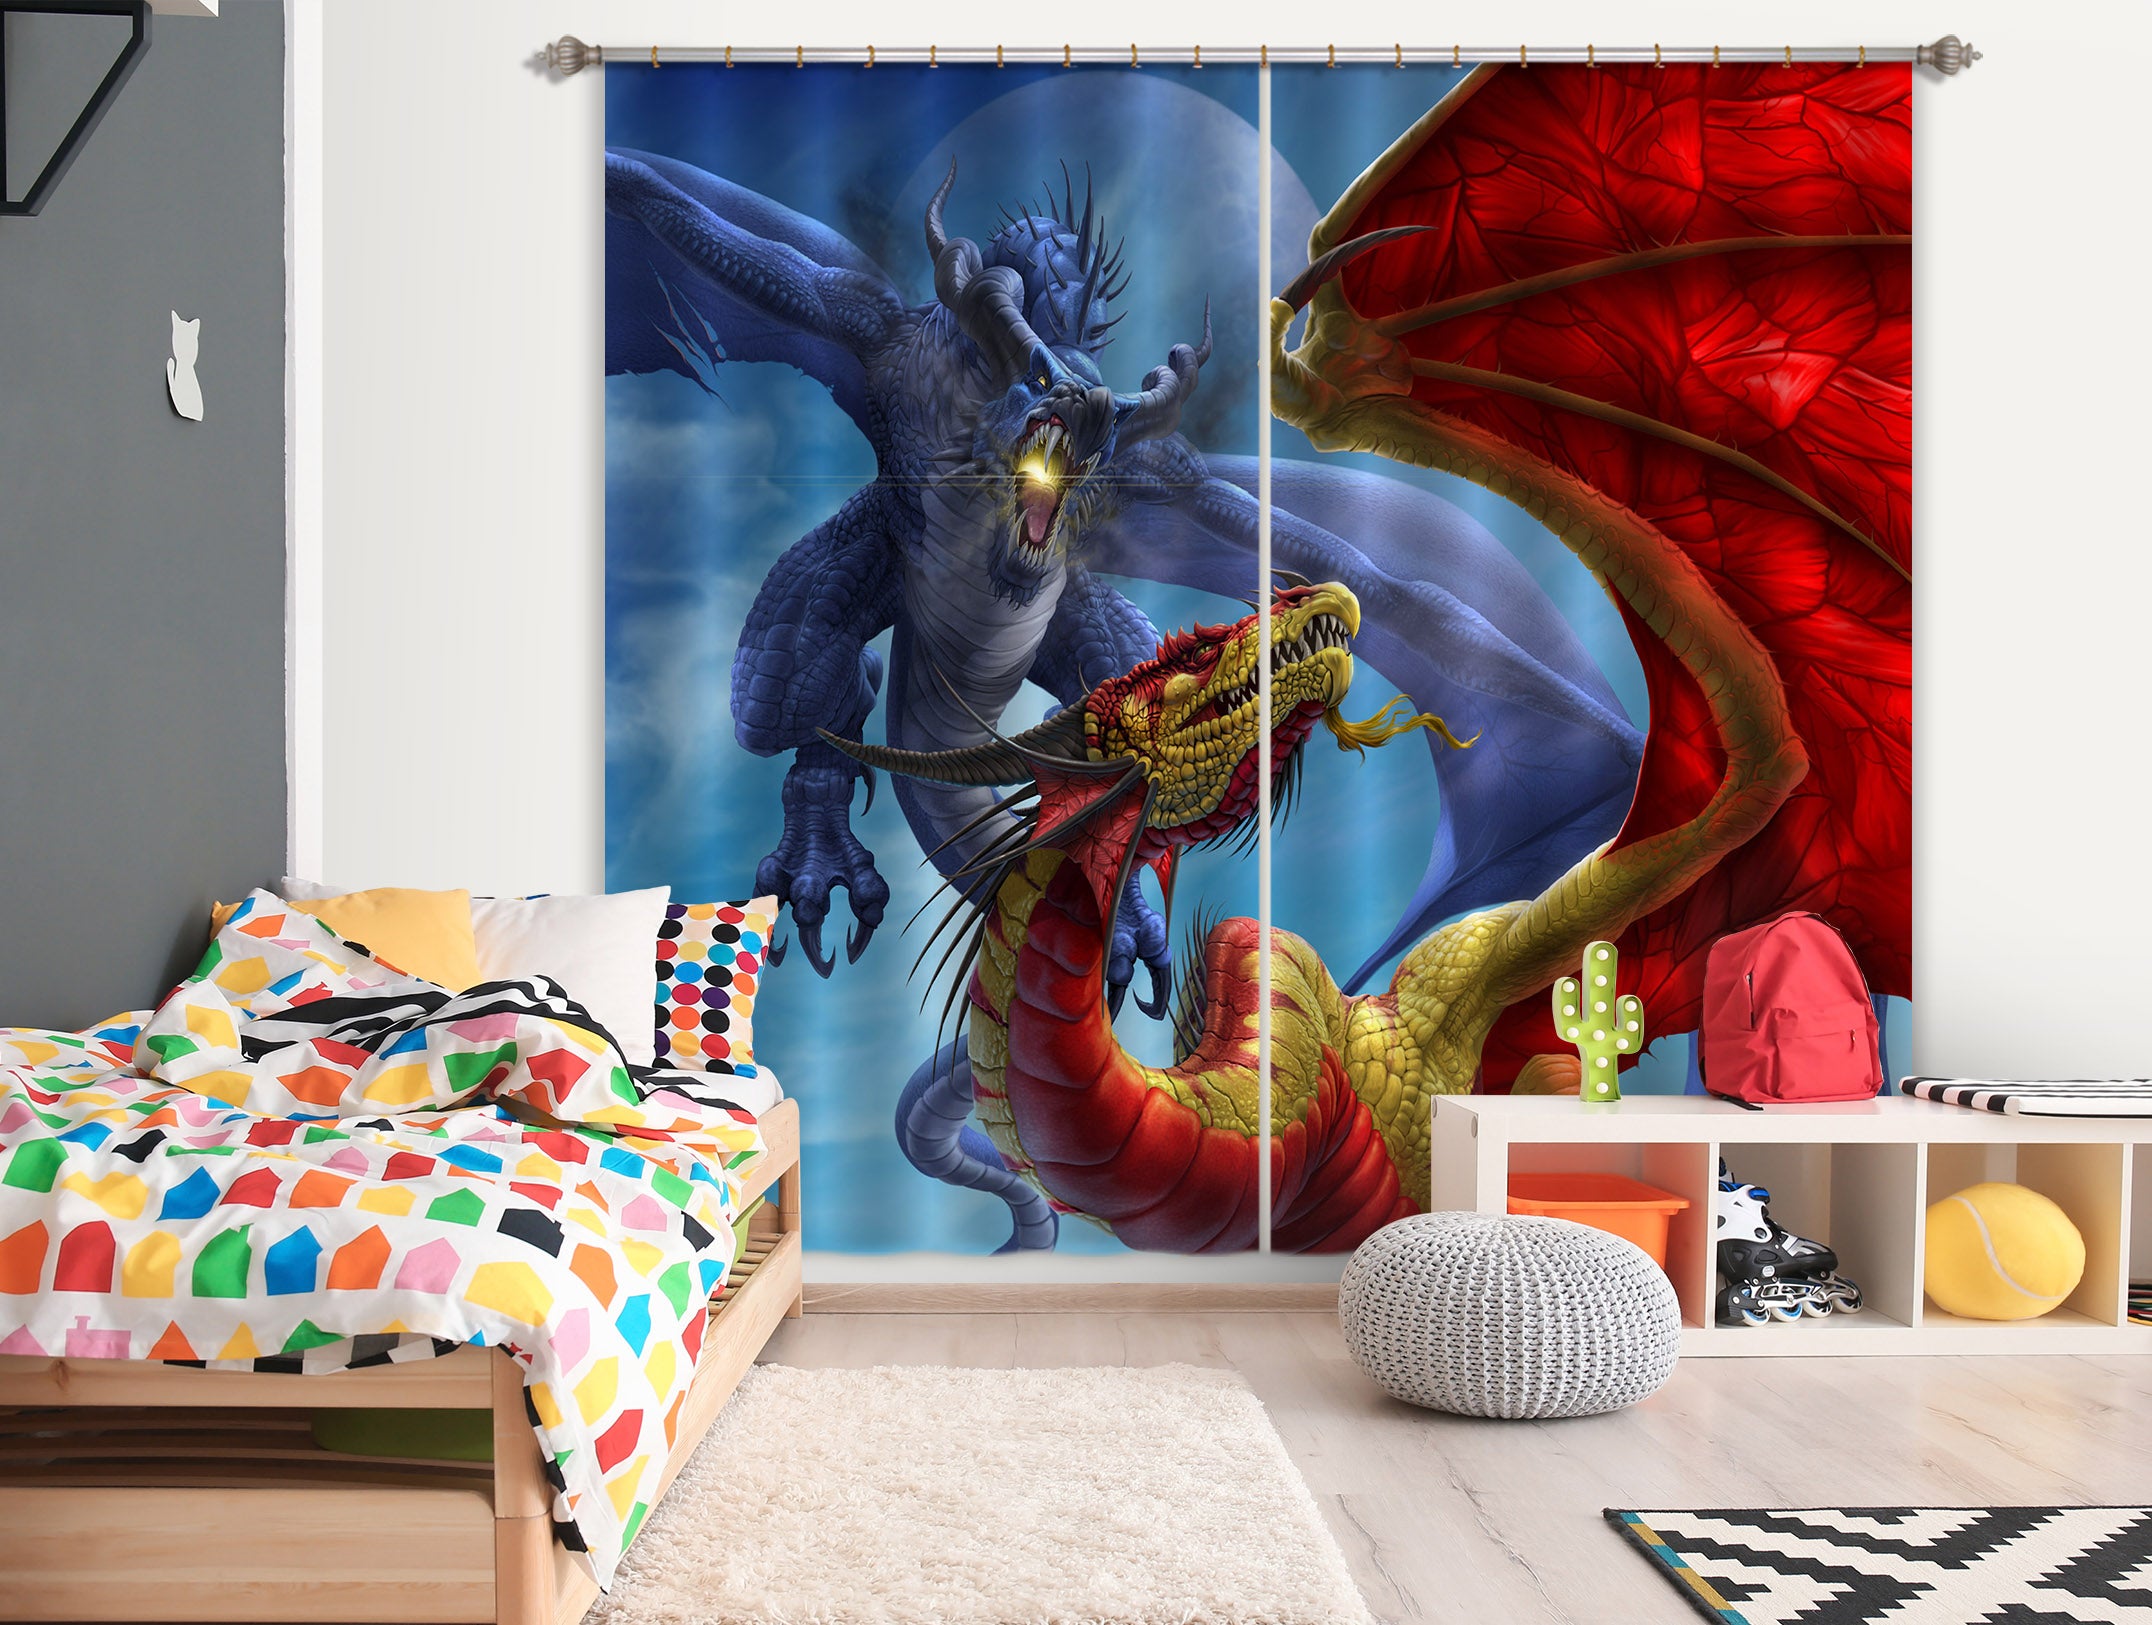 3D Blue Red Dragon 5091 Tom Wood Curtain Curtains Drapes